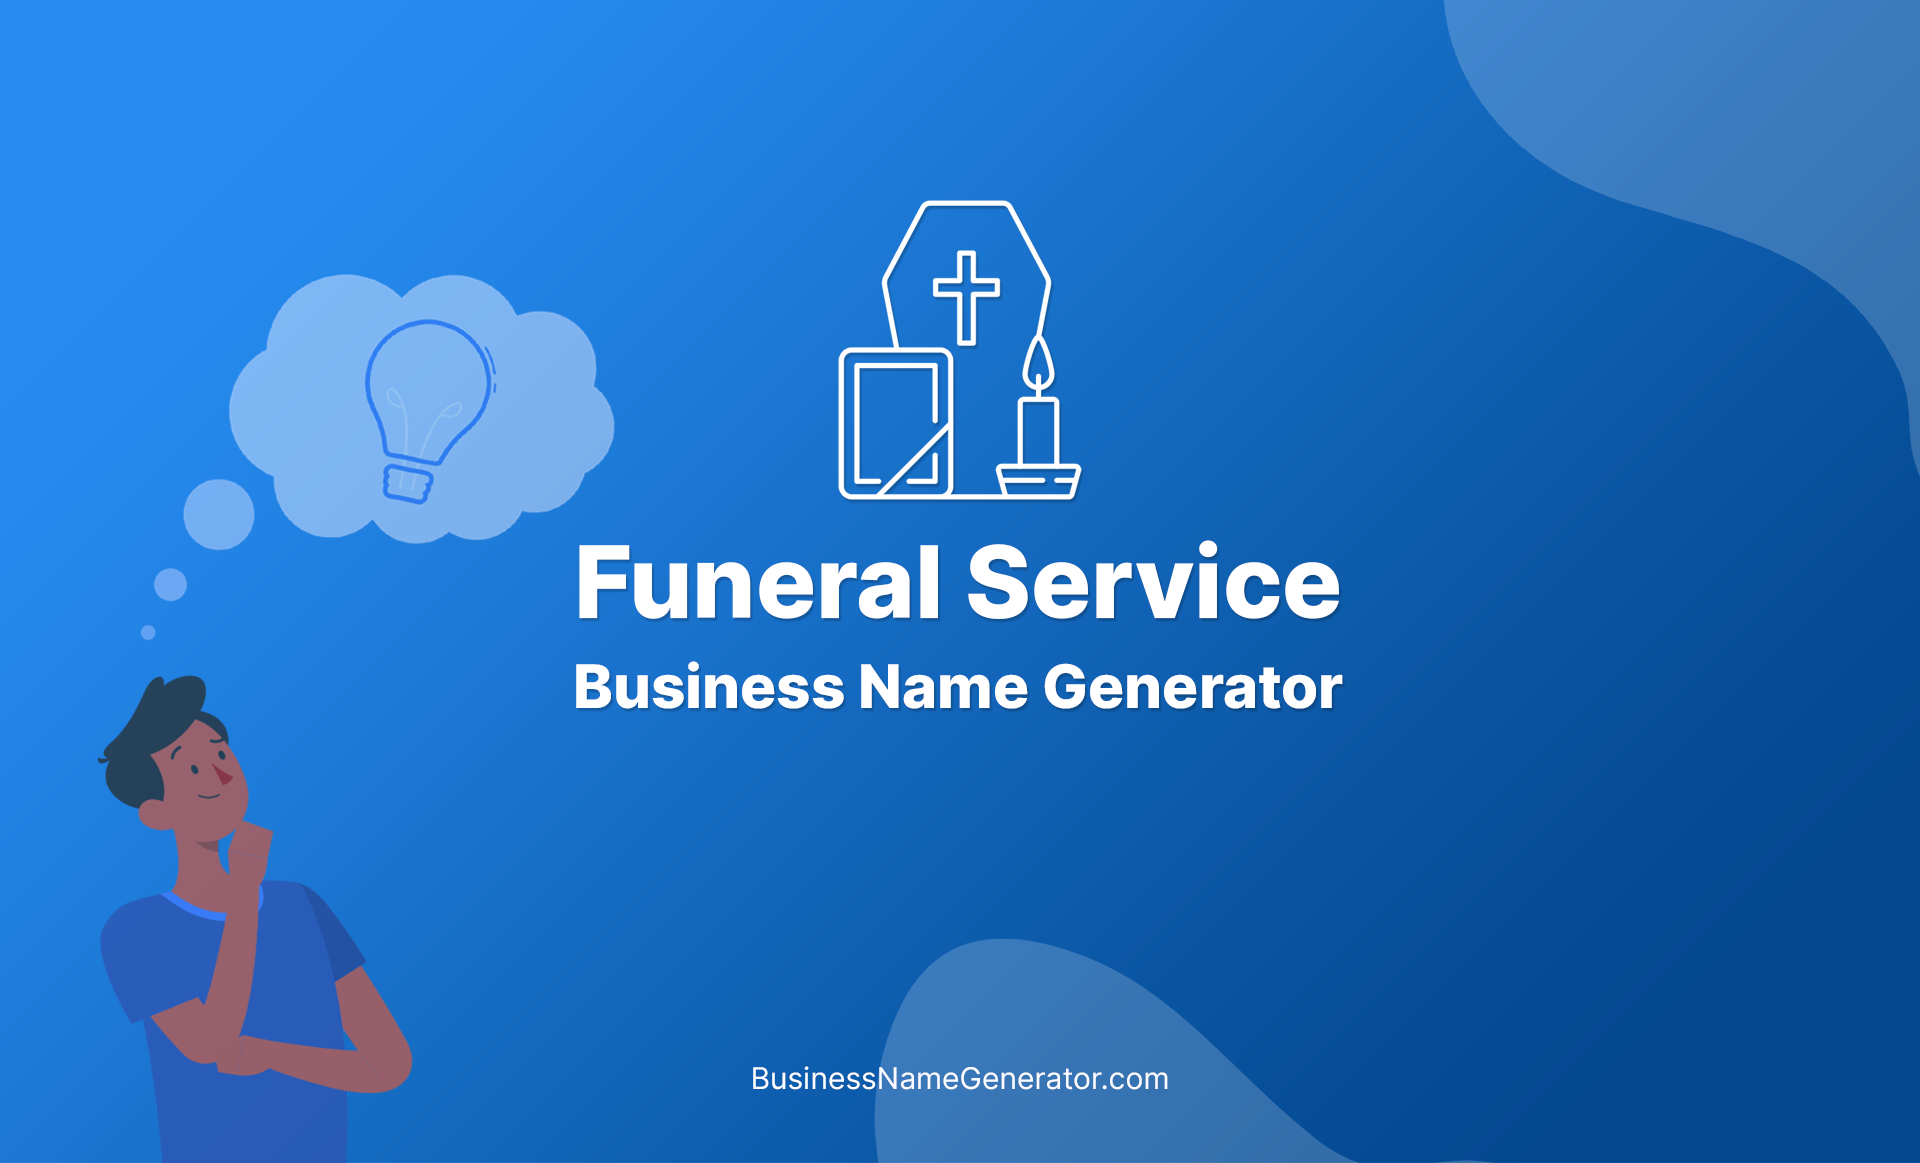 Funeral Service Business Name Generator